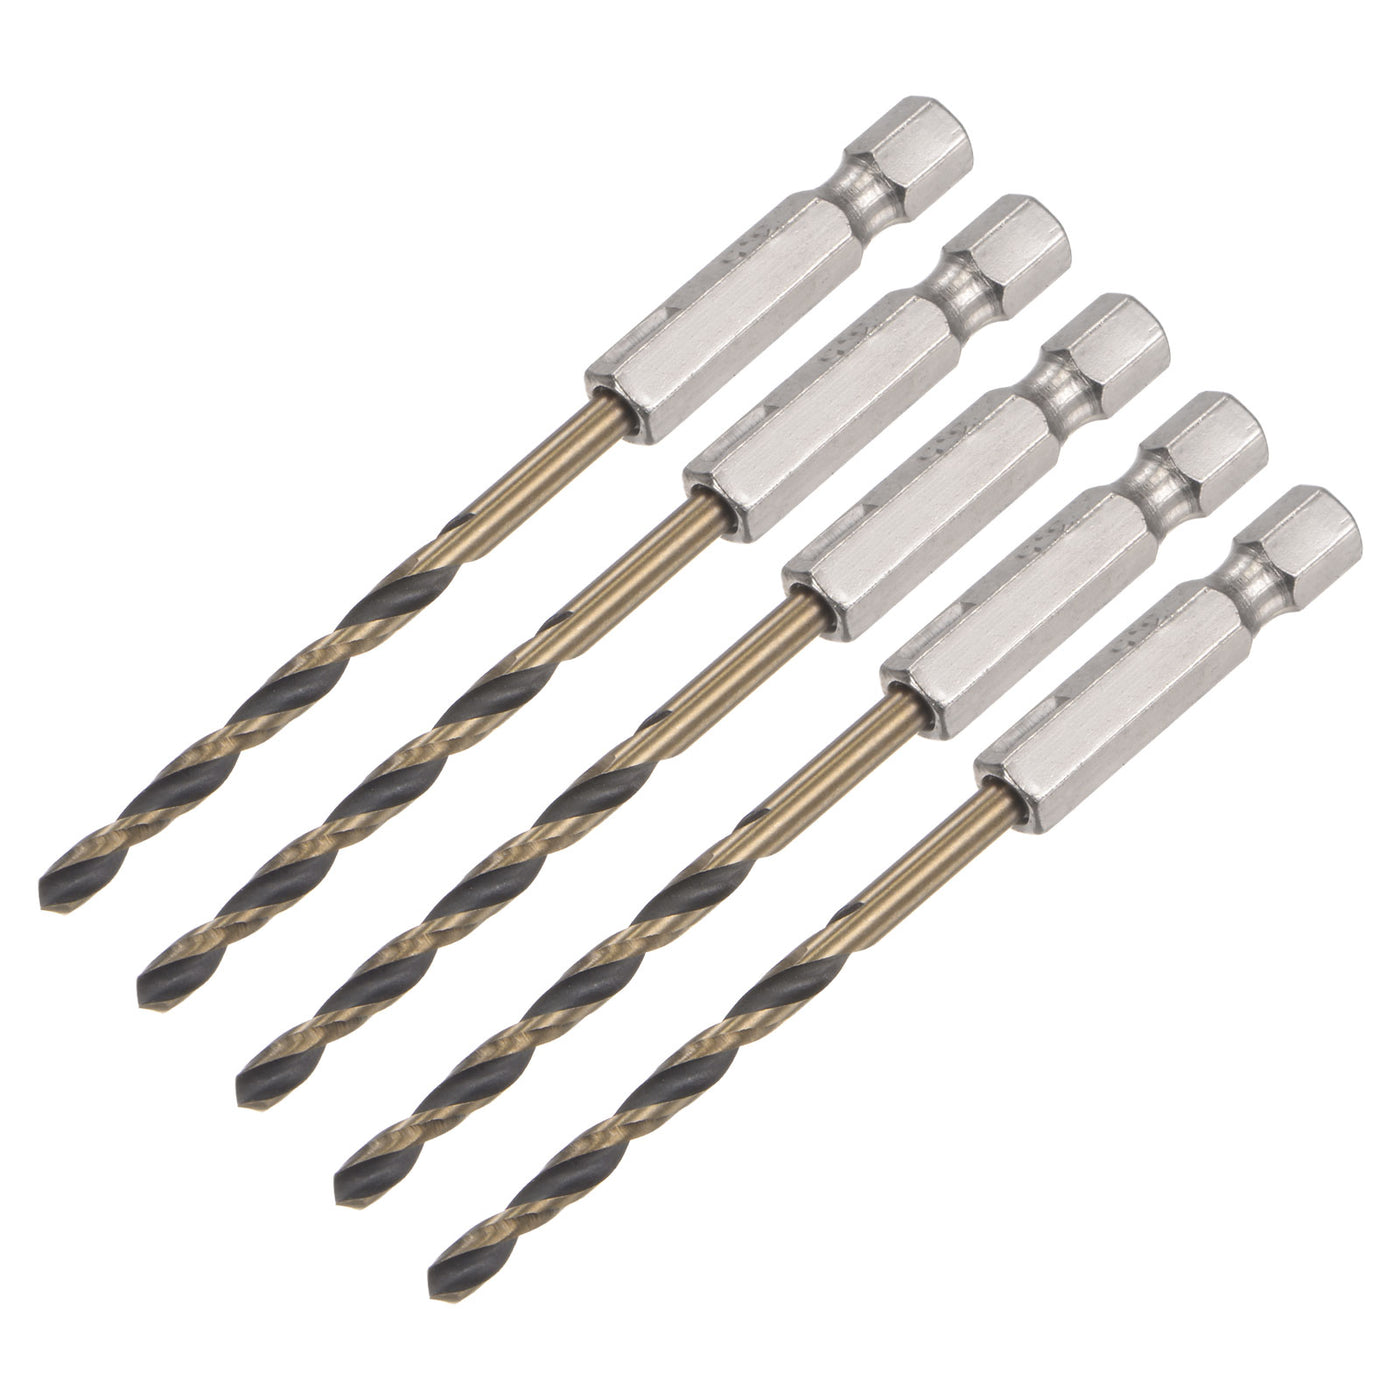 uxcell Uxcell 5Pcs 3.5mm High Speed Steel Twist Drill Bit with Hex Shank 88mm Length